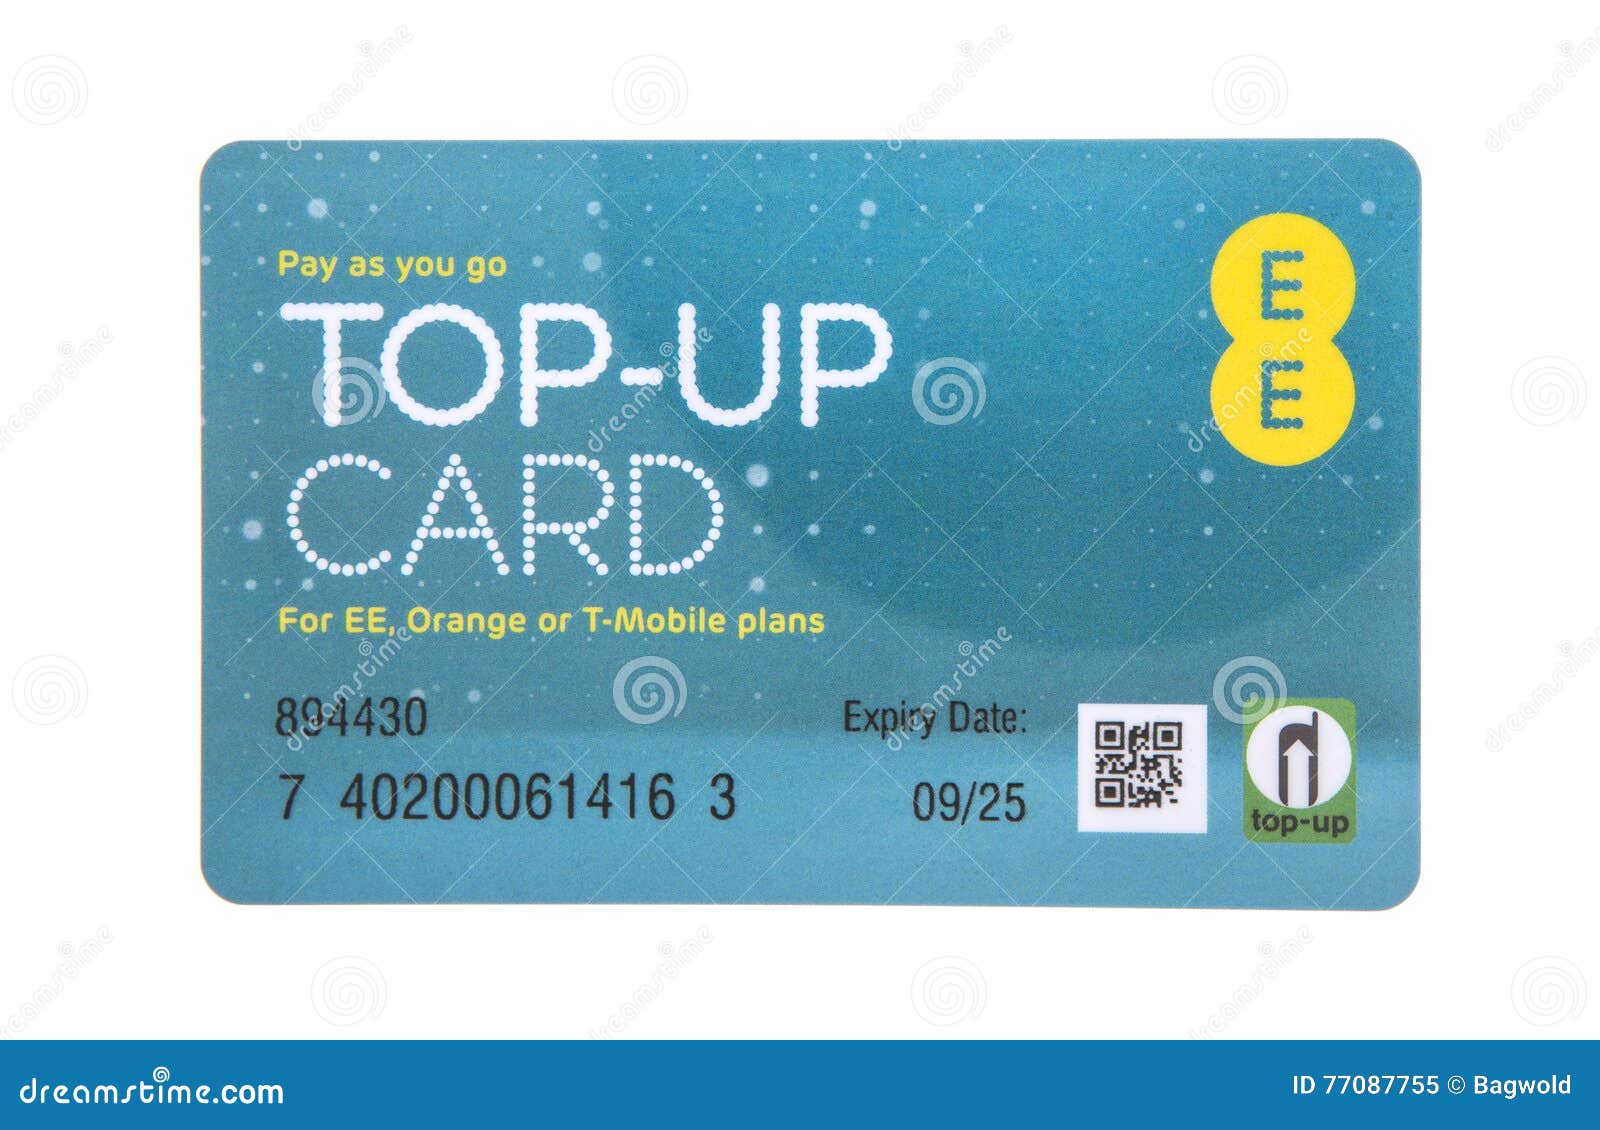 EE Pay As You Top-up Card - Image pack, number: 77087755